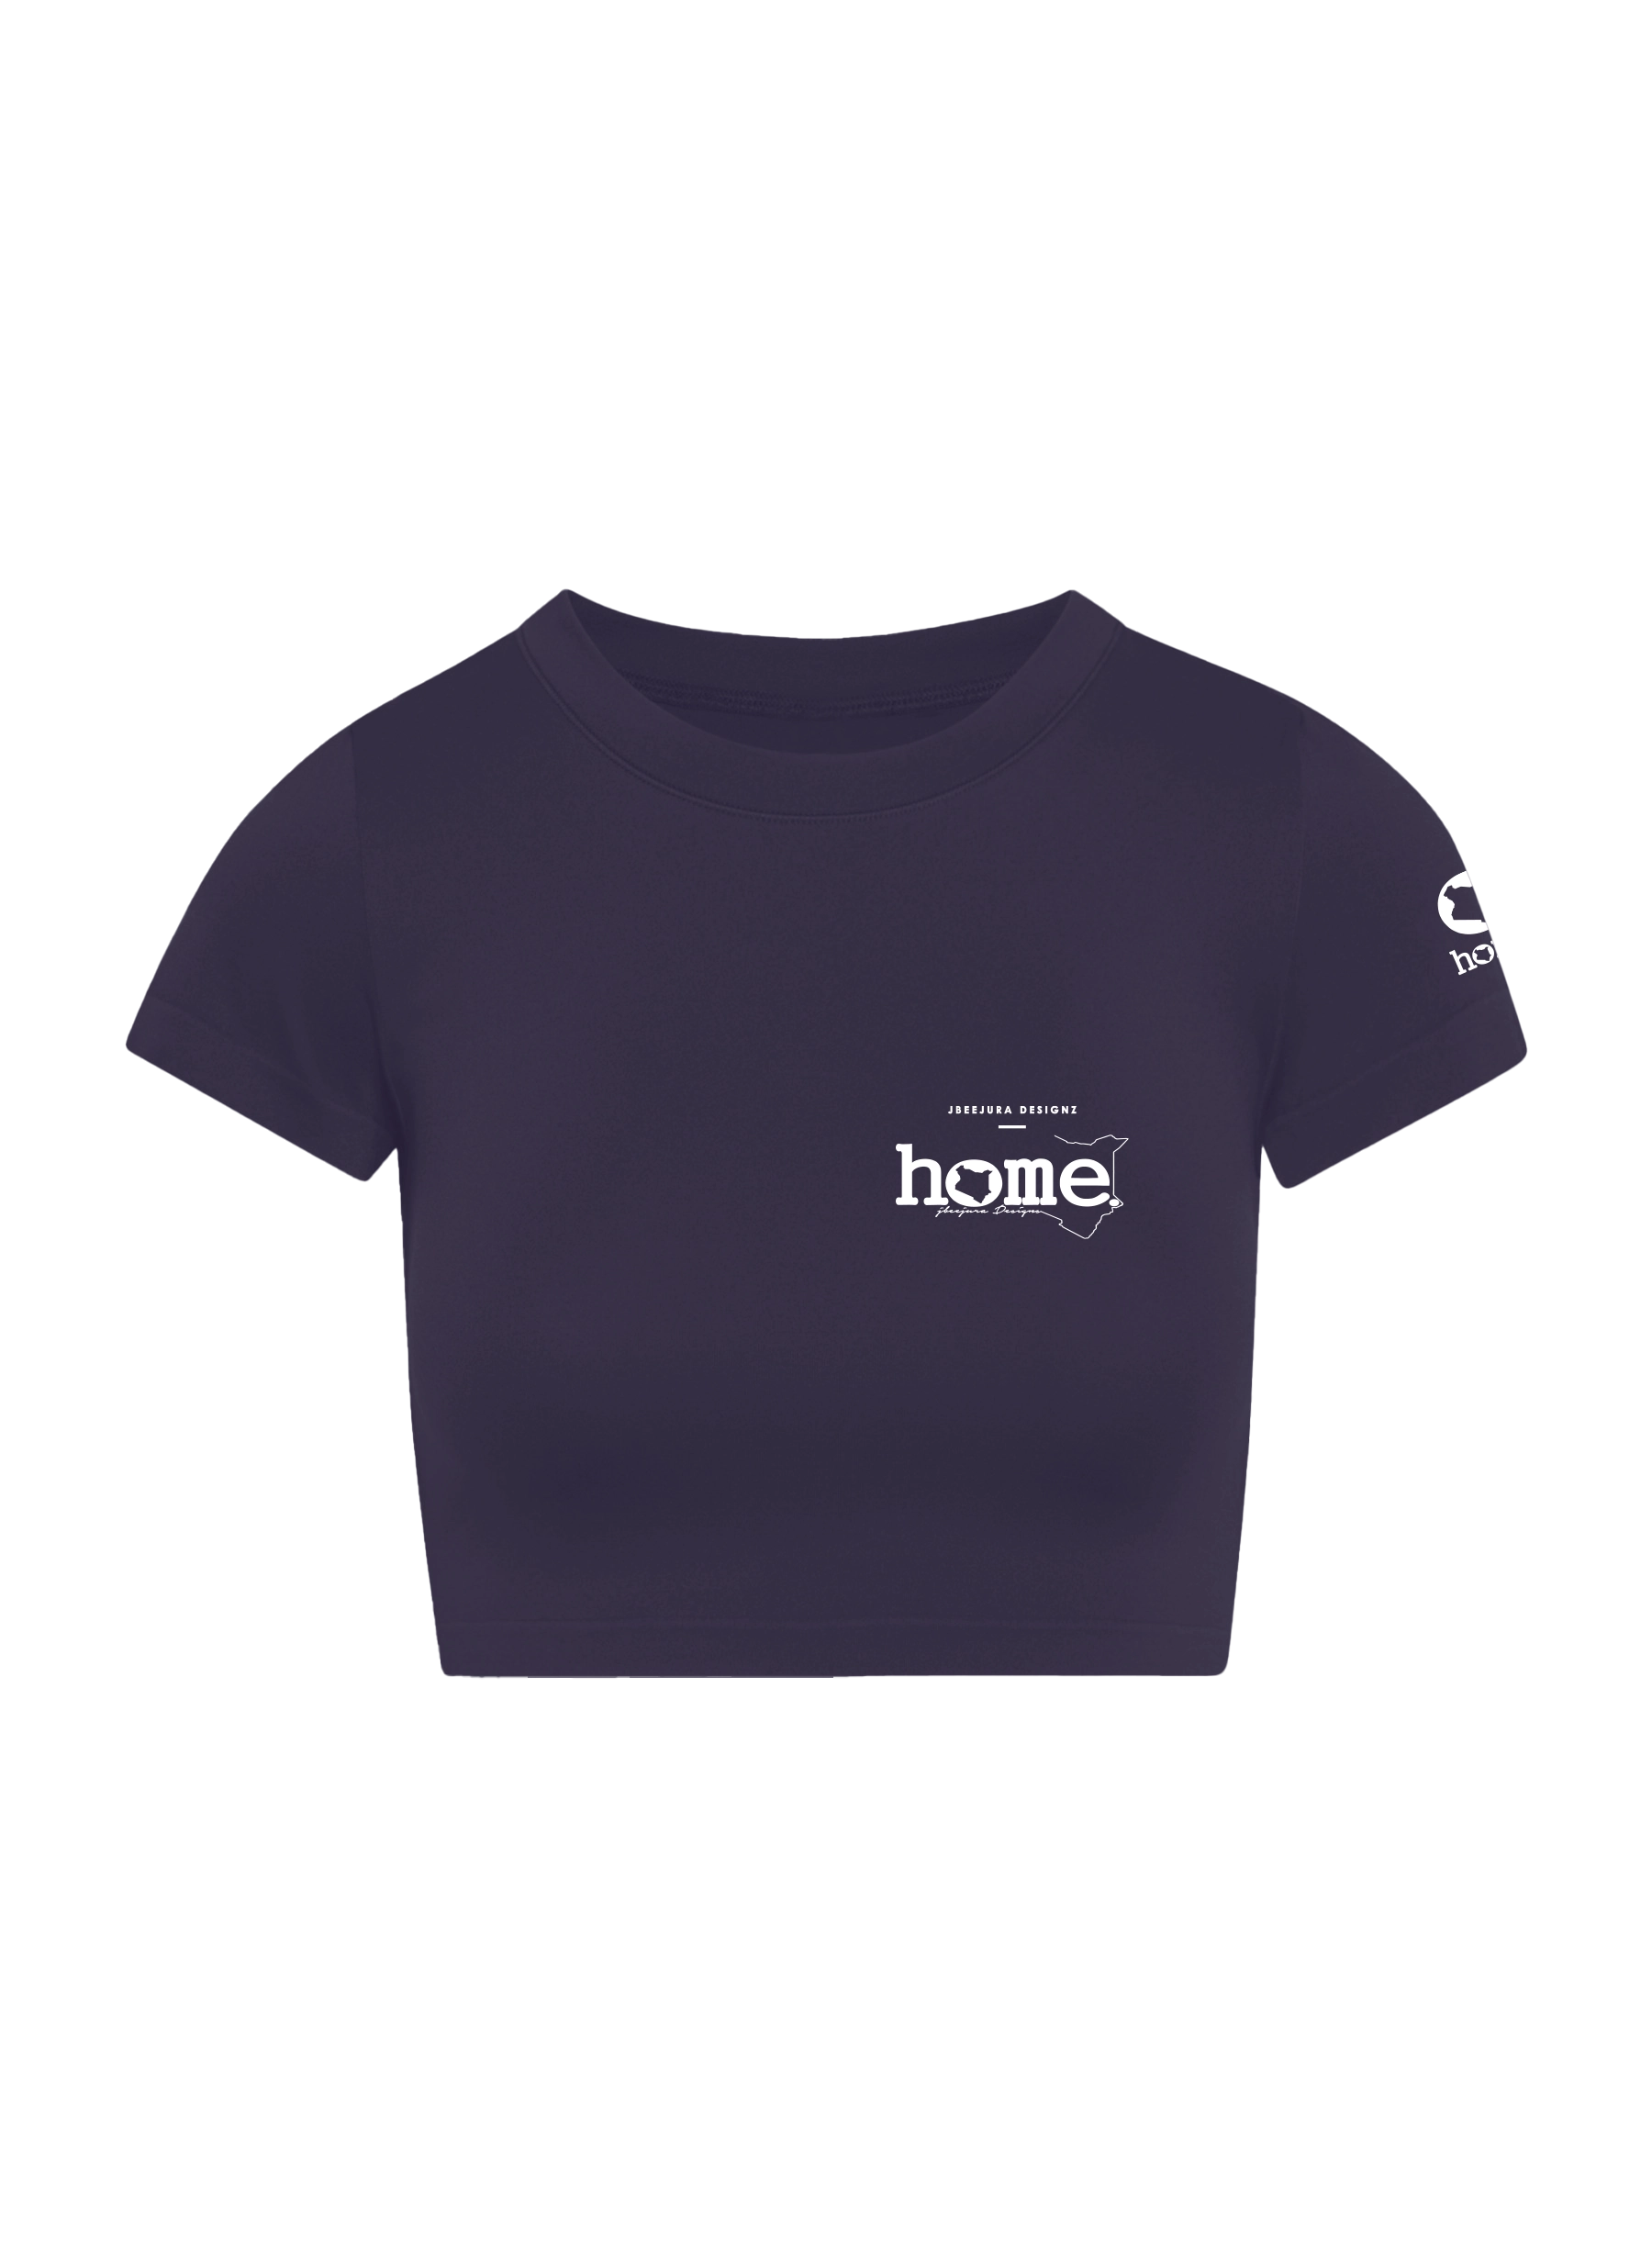 home_254 SHORT SLEEVED  RICH PURPLE ARIA TEE WITH A WHITE 3D WORDS PRINT 